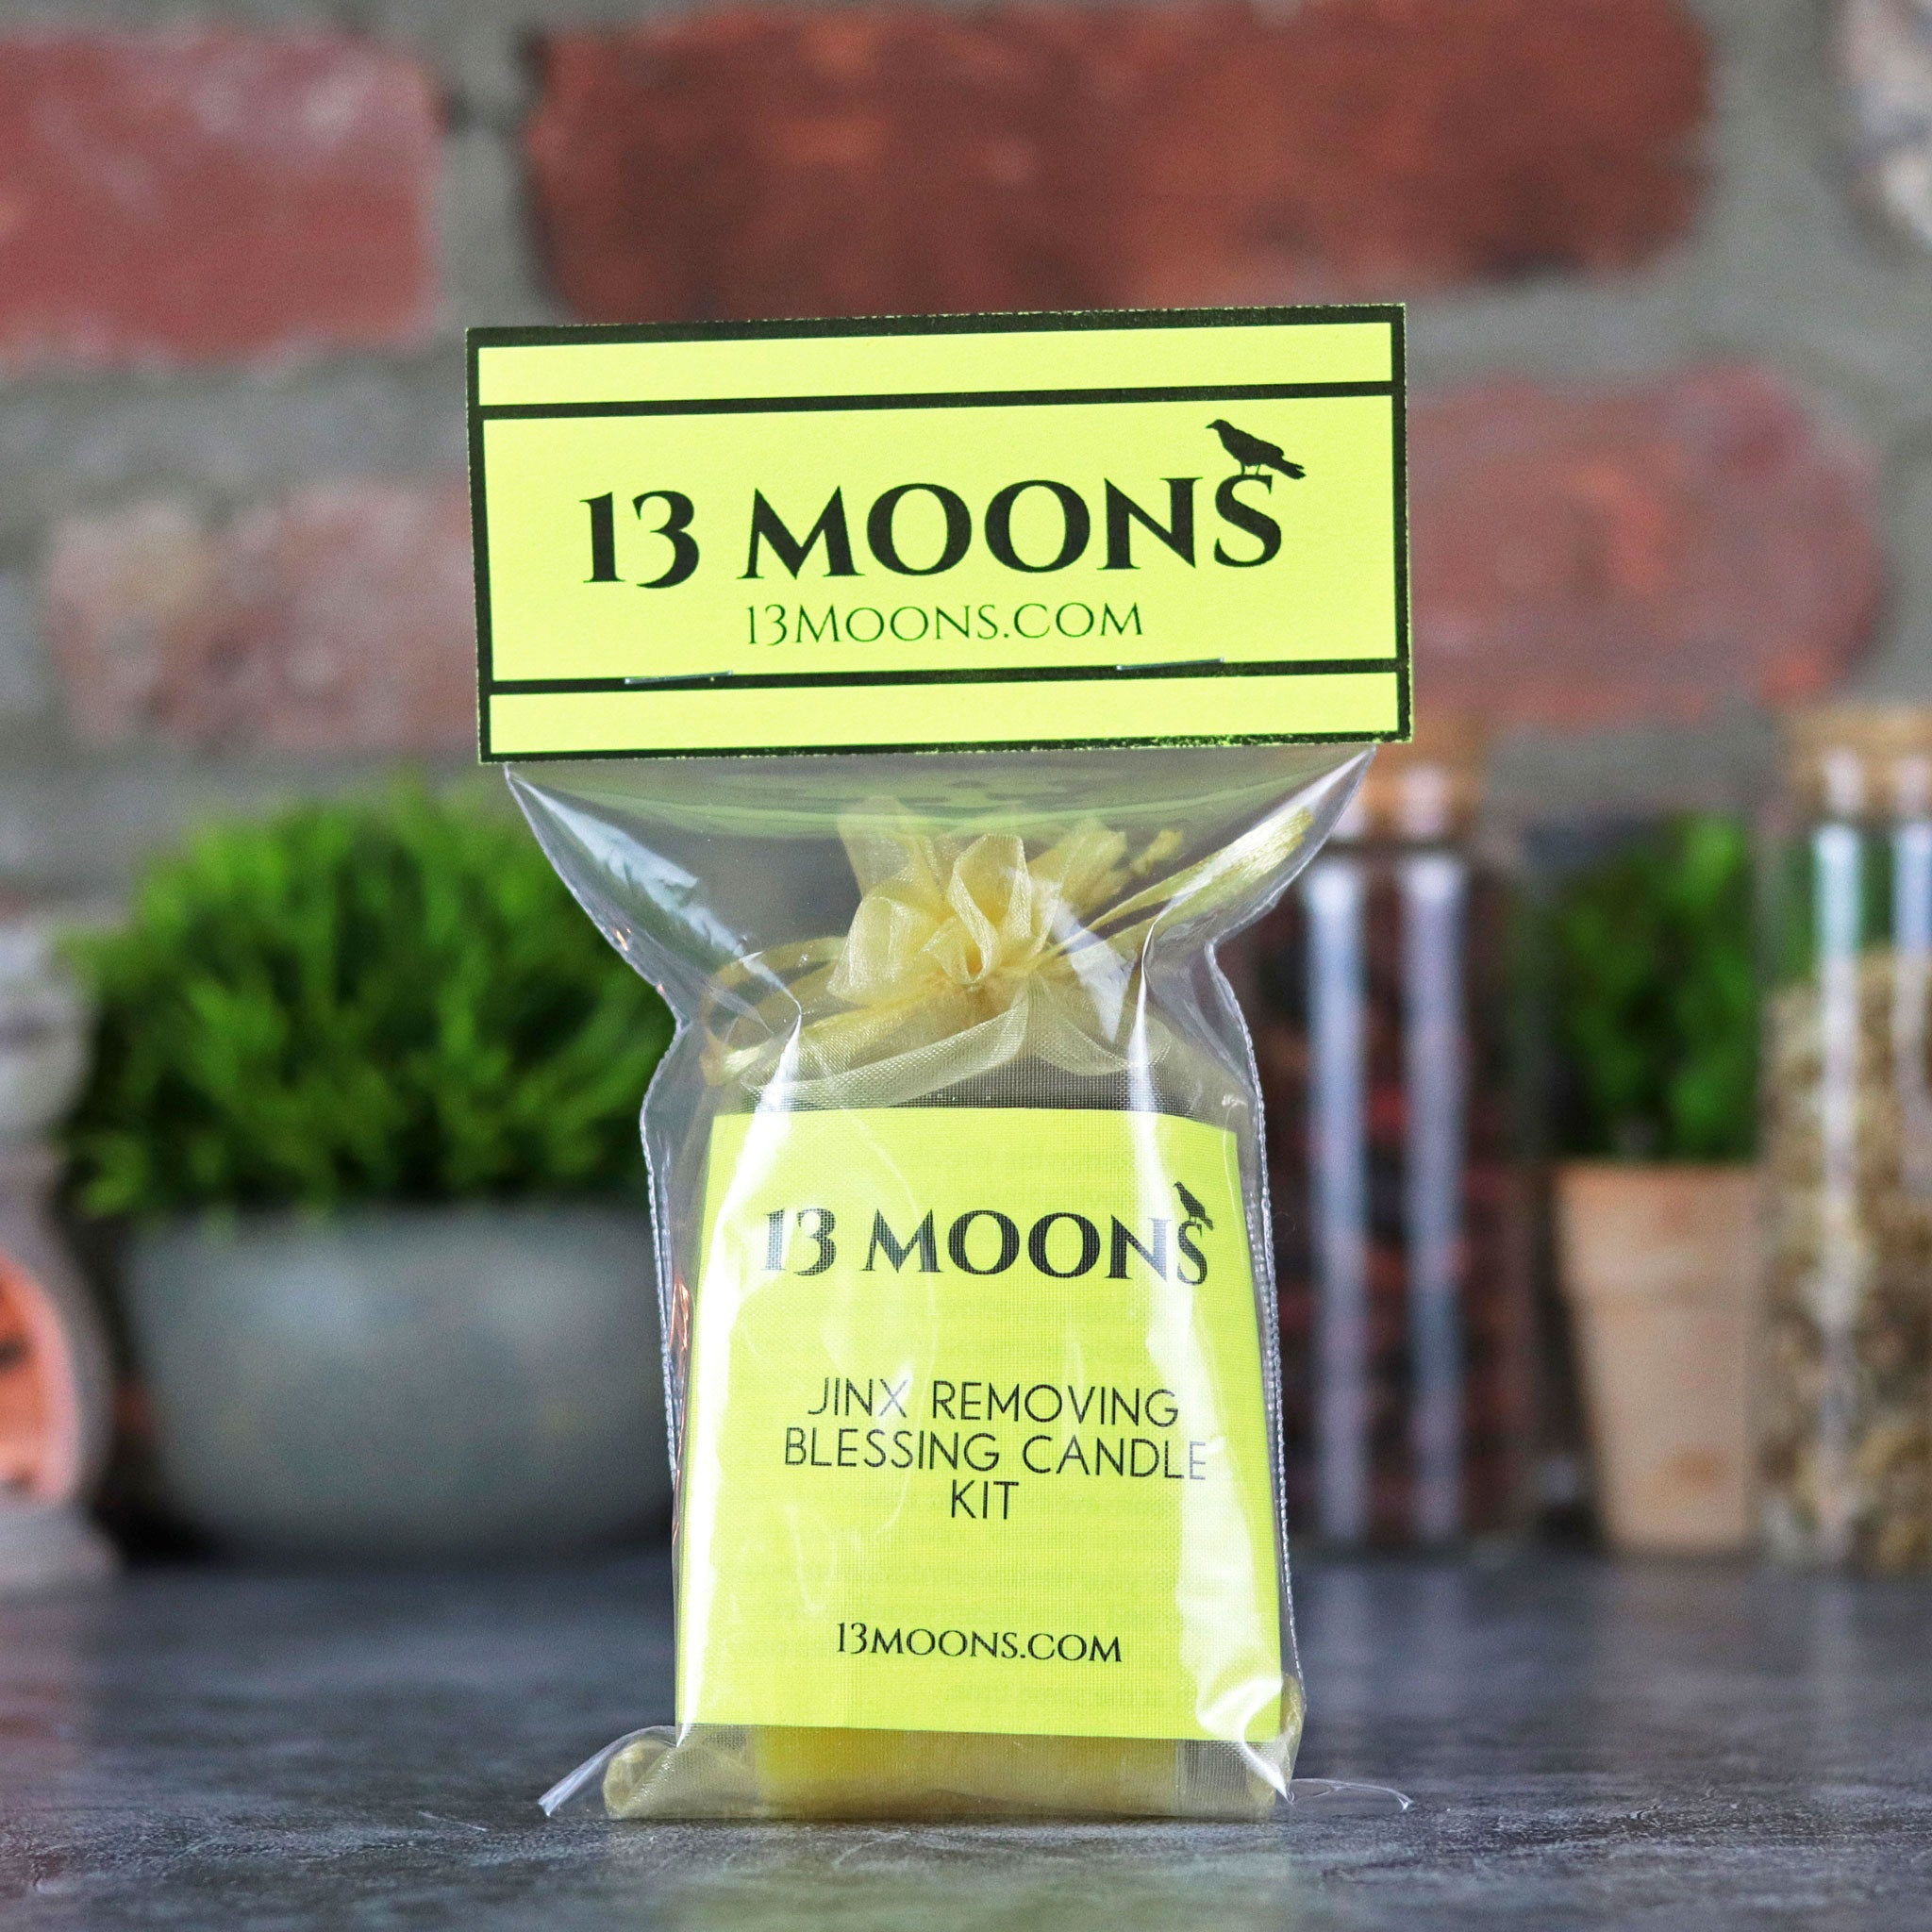 Jinx Removing Blessing Candle Kit - 13 Moons